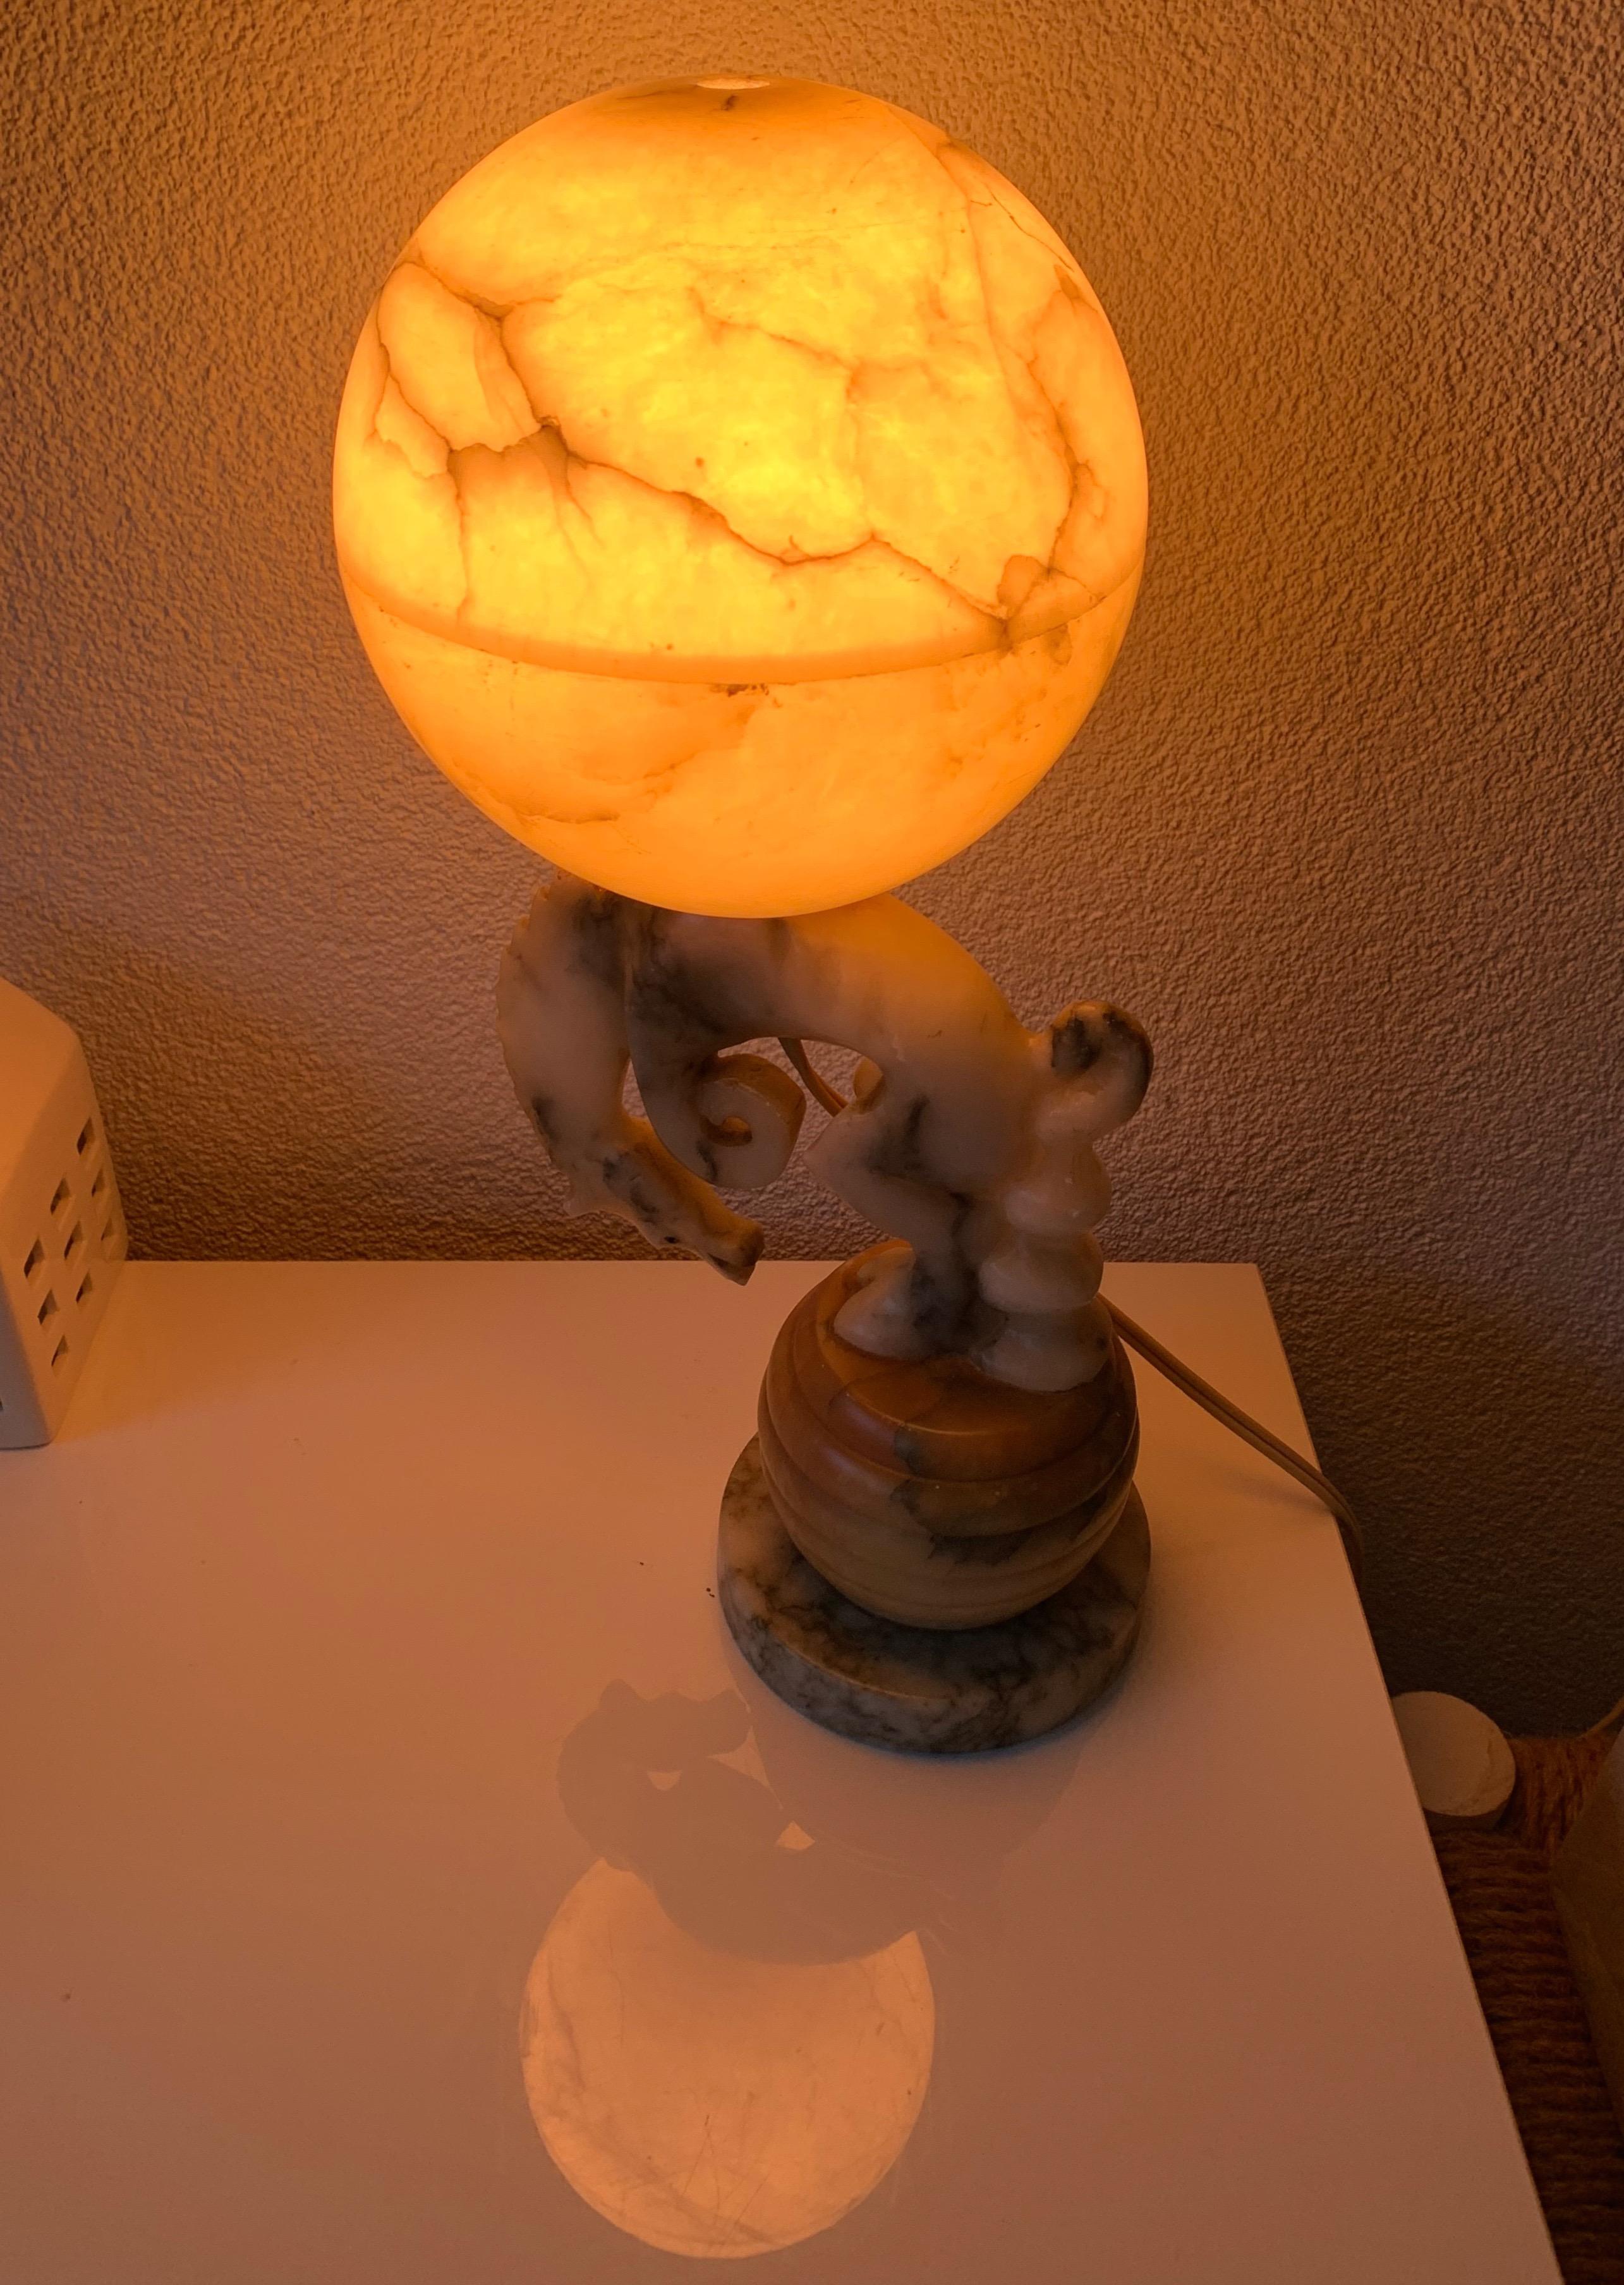 Stylized and finest quality carved, bronco horse table lamp.

All handcrafted out of natural materials only, this rare bucking horse table lamp is a marvelous work of art in the daytime and a stunning and spherical light fixture in the evenings.